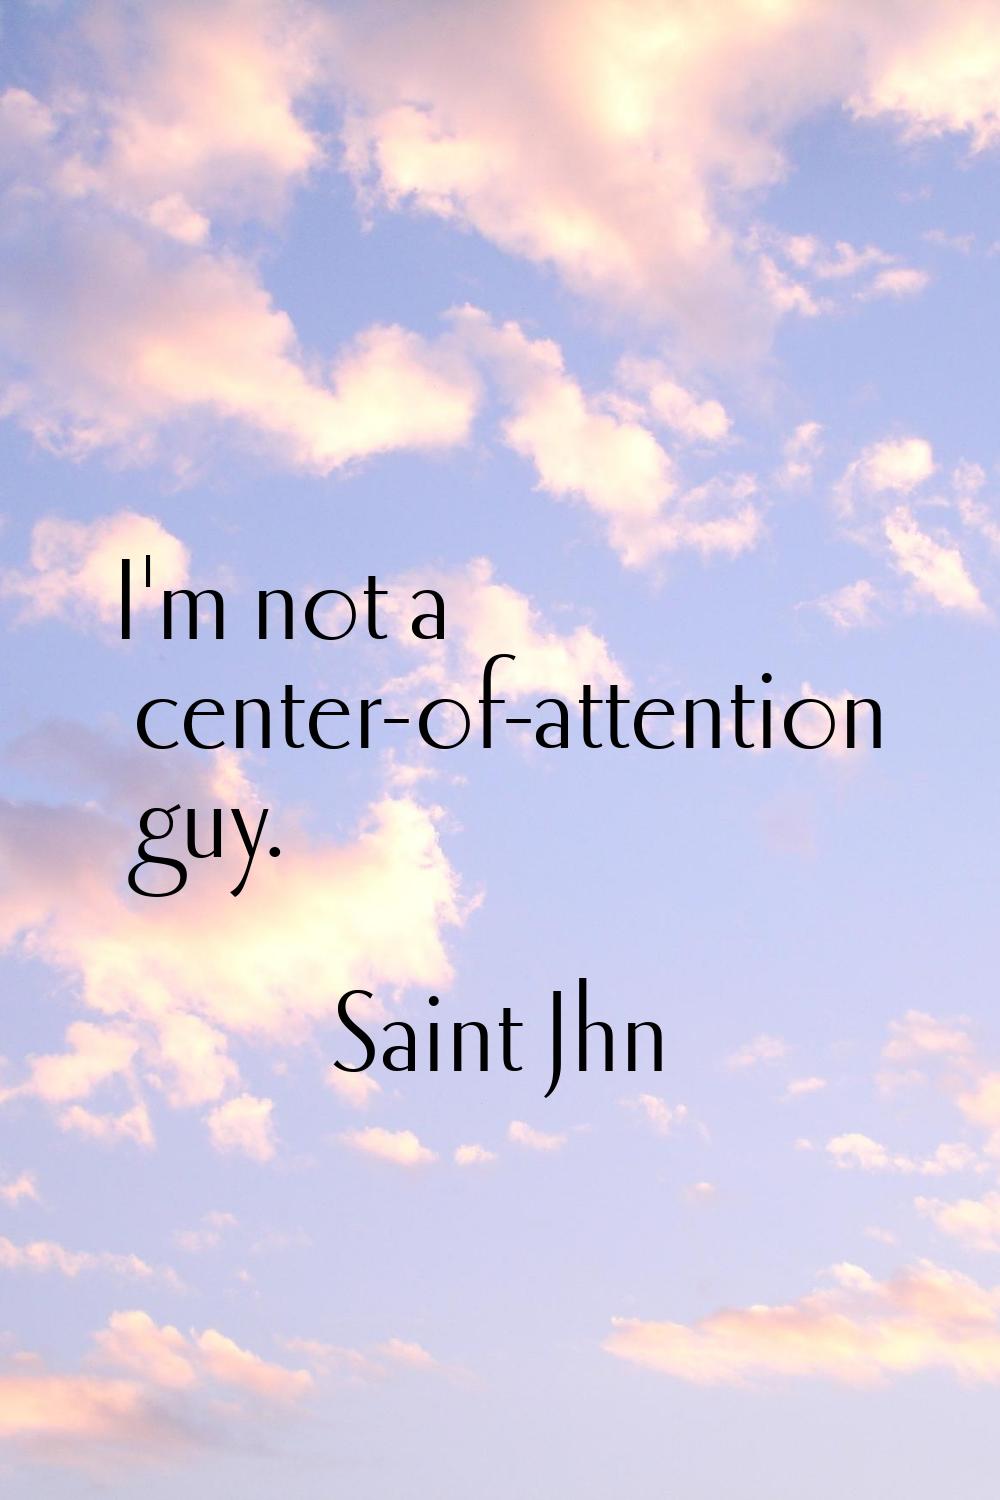 I'm not a center-of-attention guy.